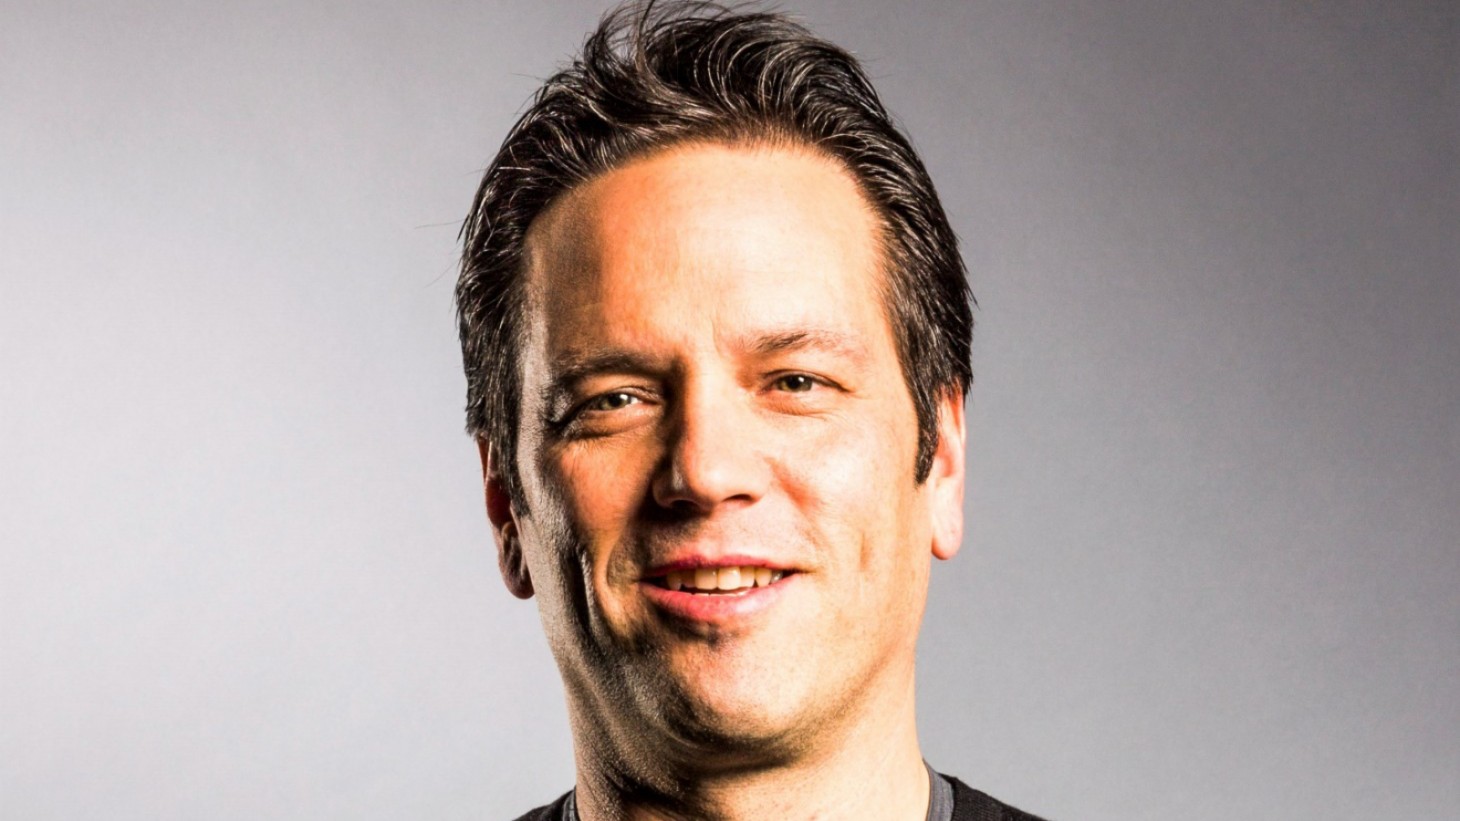 Xbox's Phil Spencer says he wouldn't use Sony's own exclusivity tactics  against PlayStation